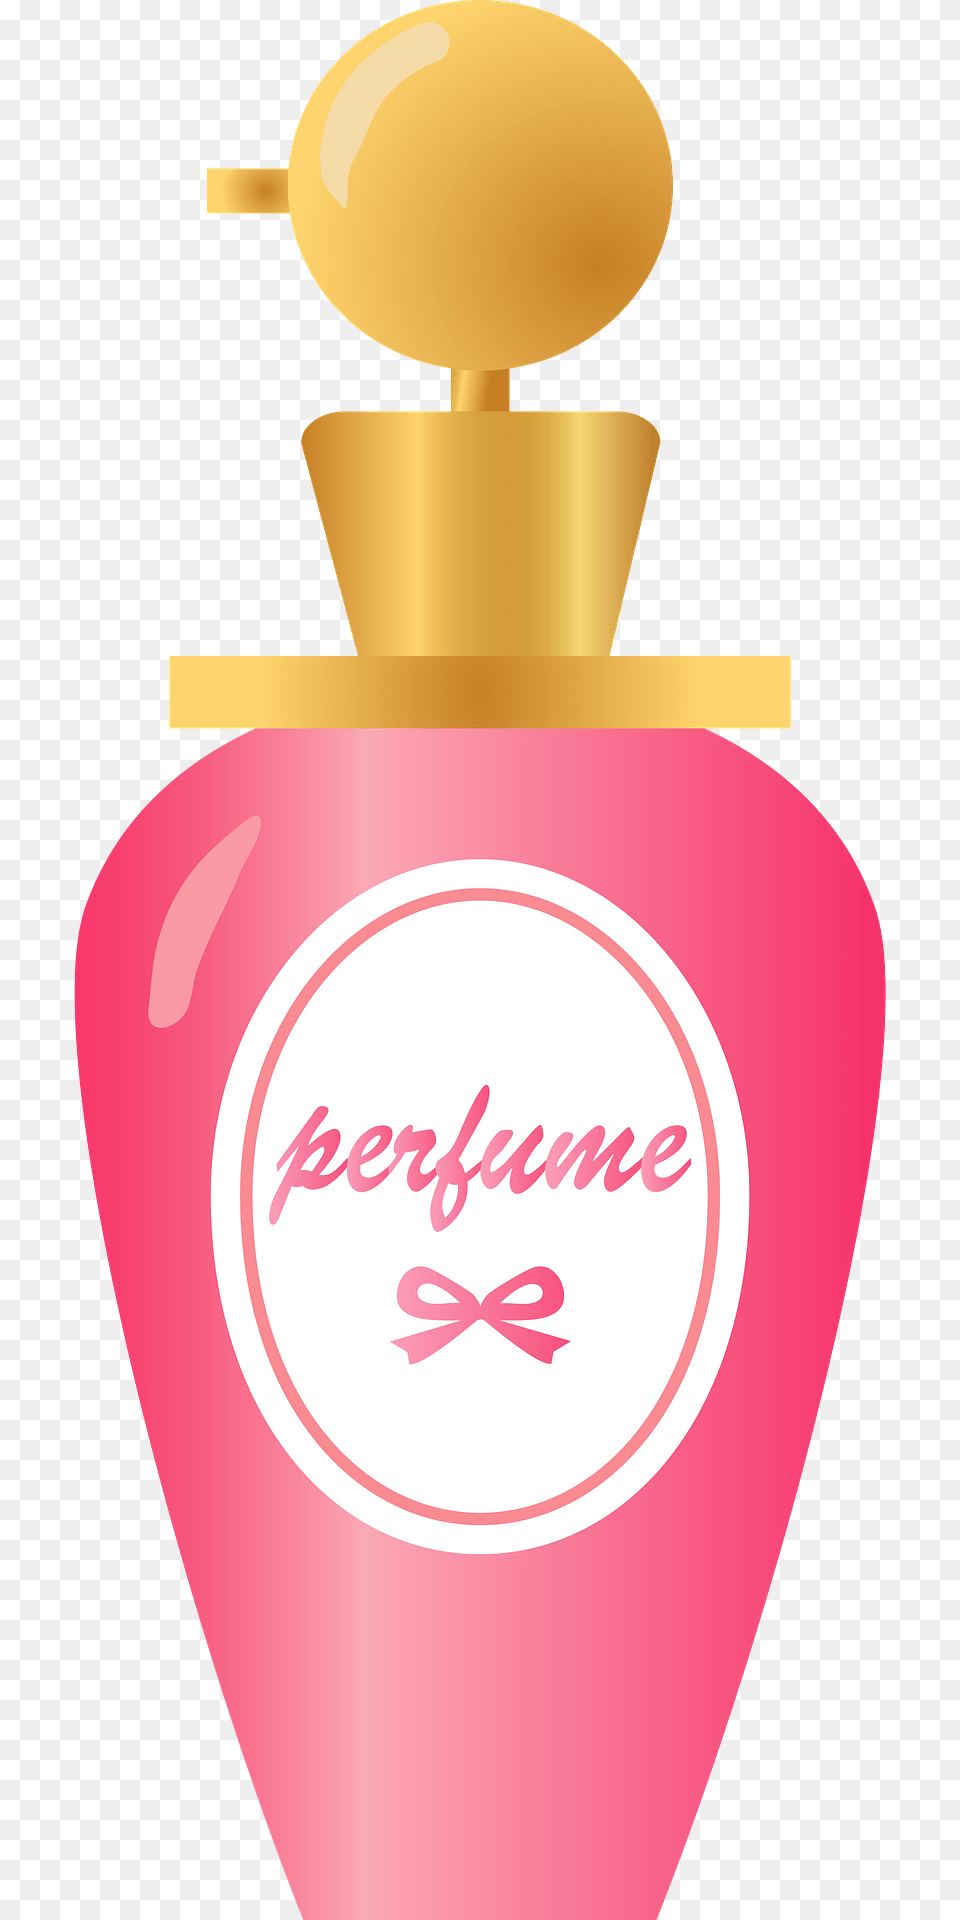 Perfume Bottle Clipart, Cosmetics Free Transparent Png